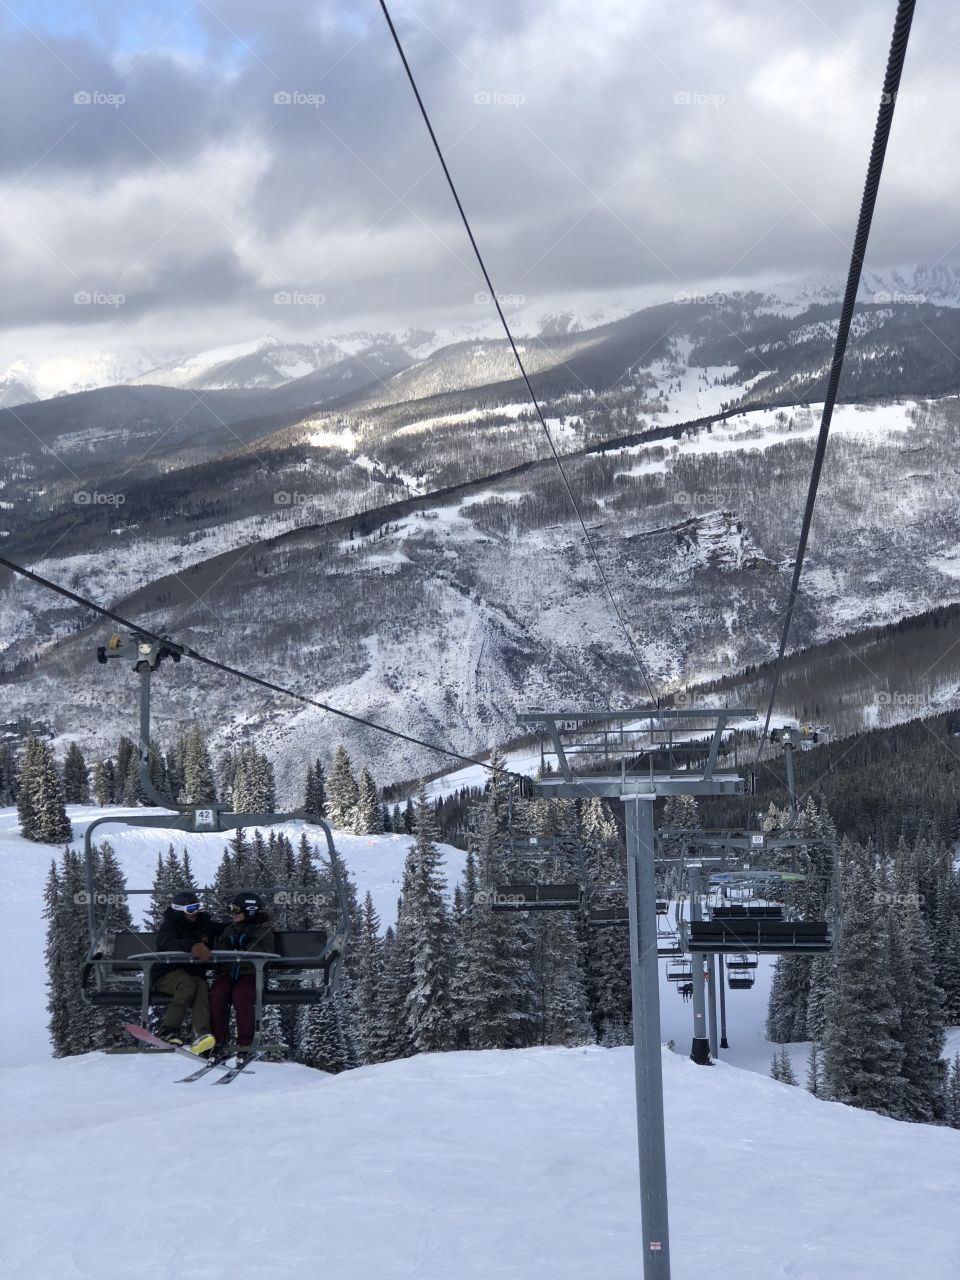 Chairlift views